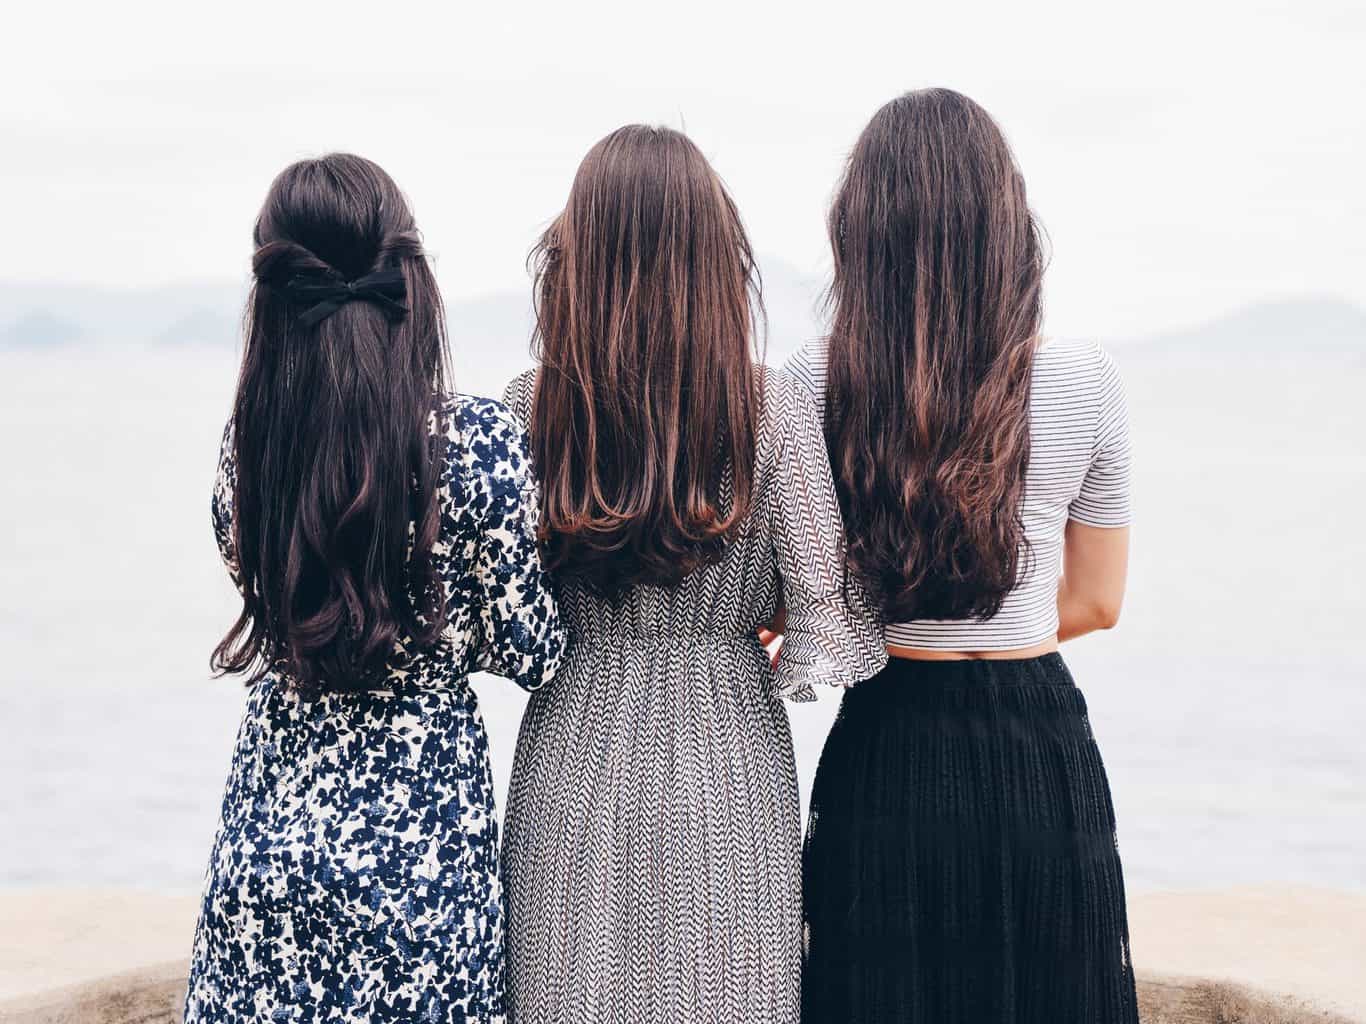 5 Tips For Better Hair Care Routine 1